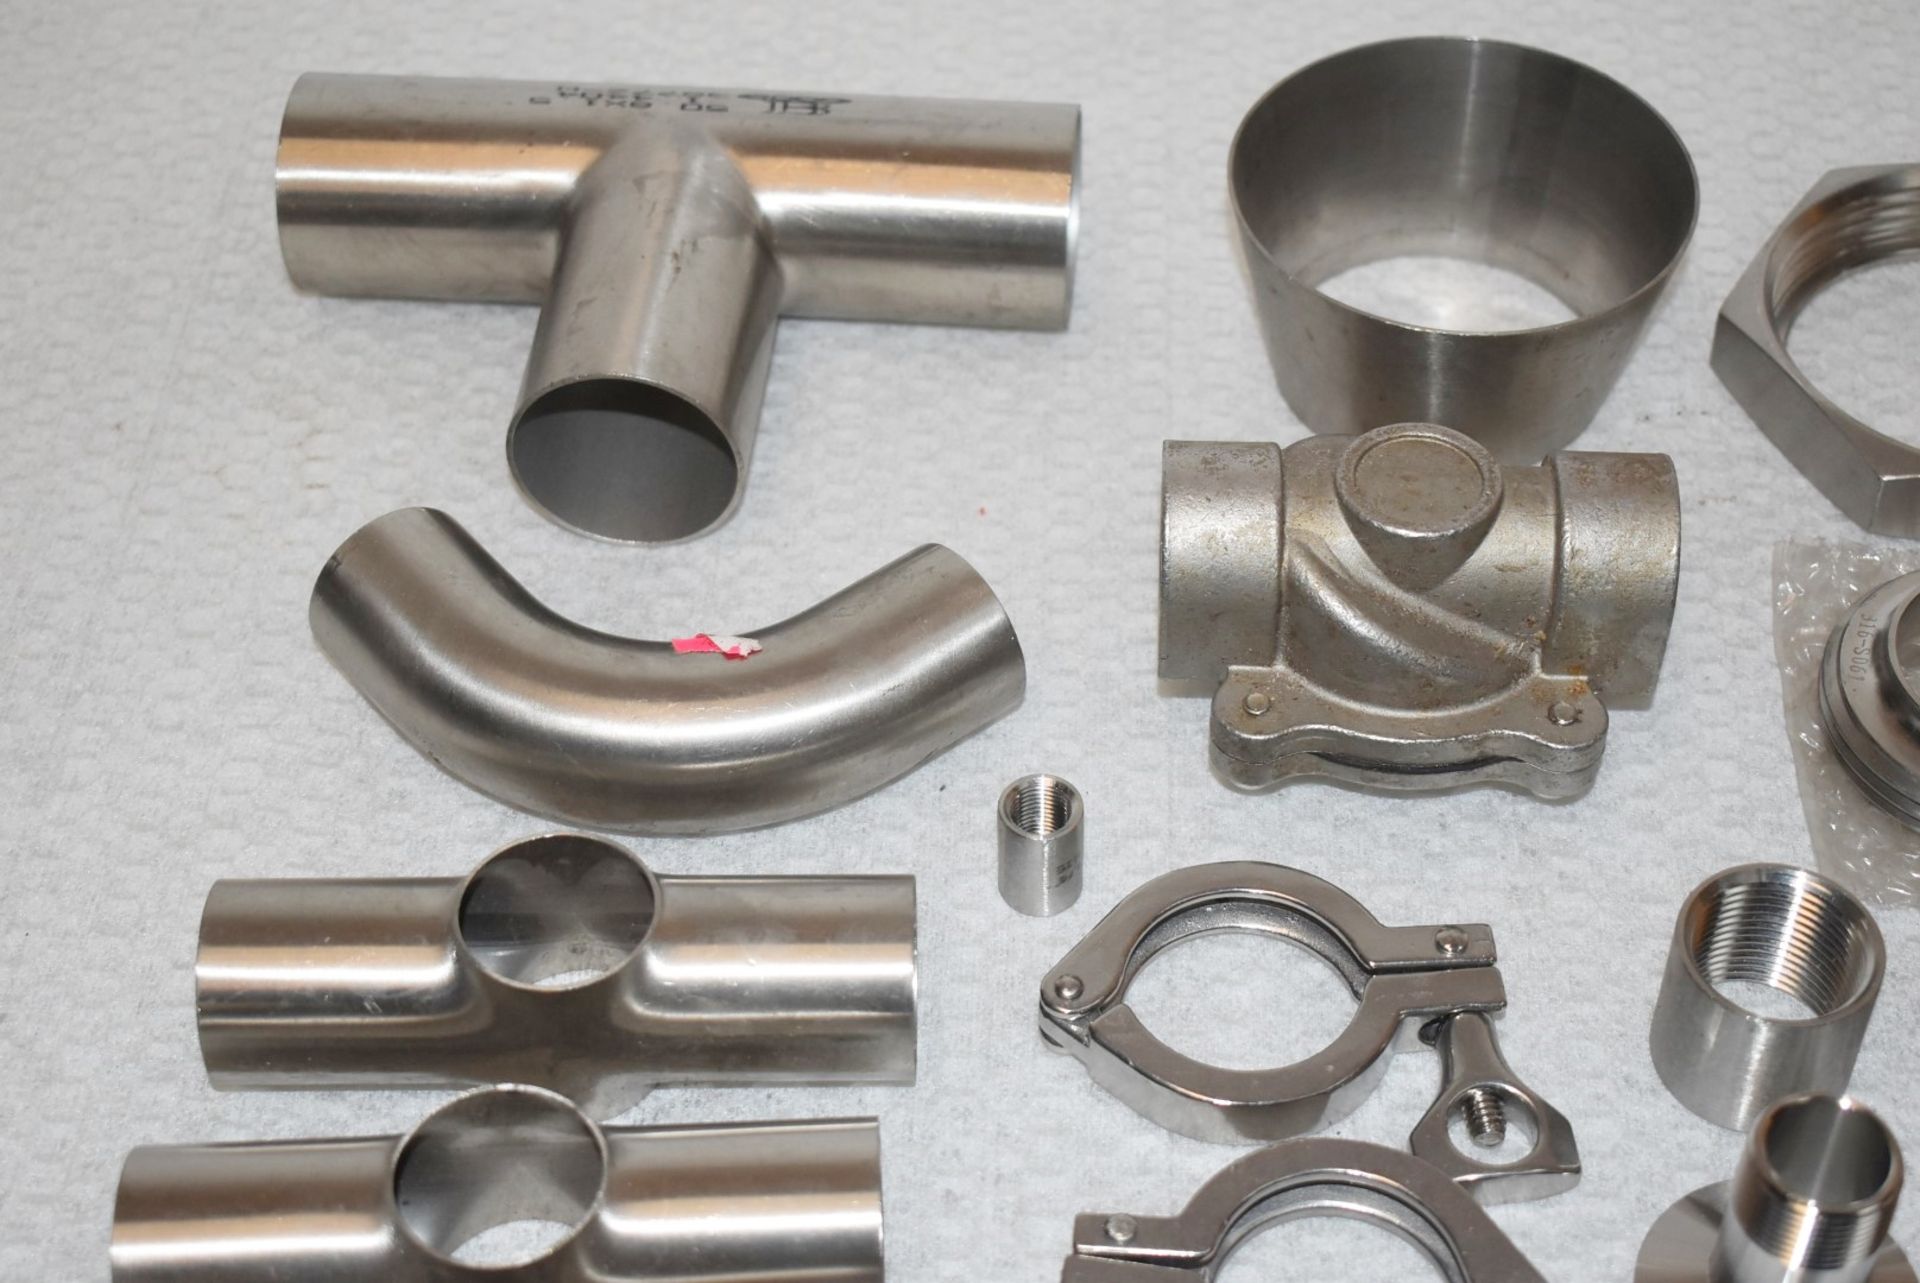 Assorted Job Lot of Stainless Steel Fittings For Brewery Equipment - Includes Approx 37 Pieces - - Image 3 of 8